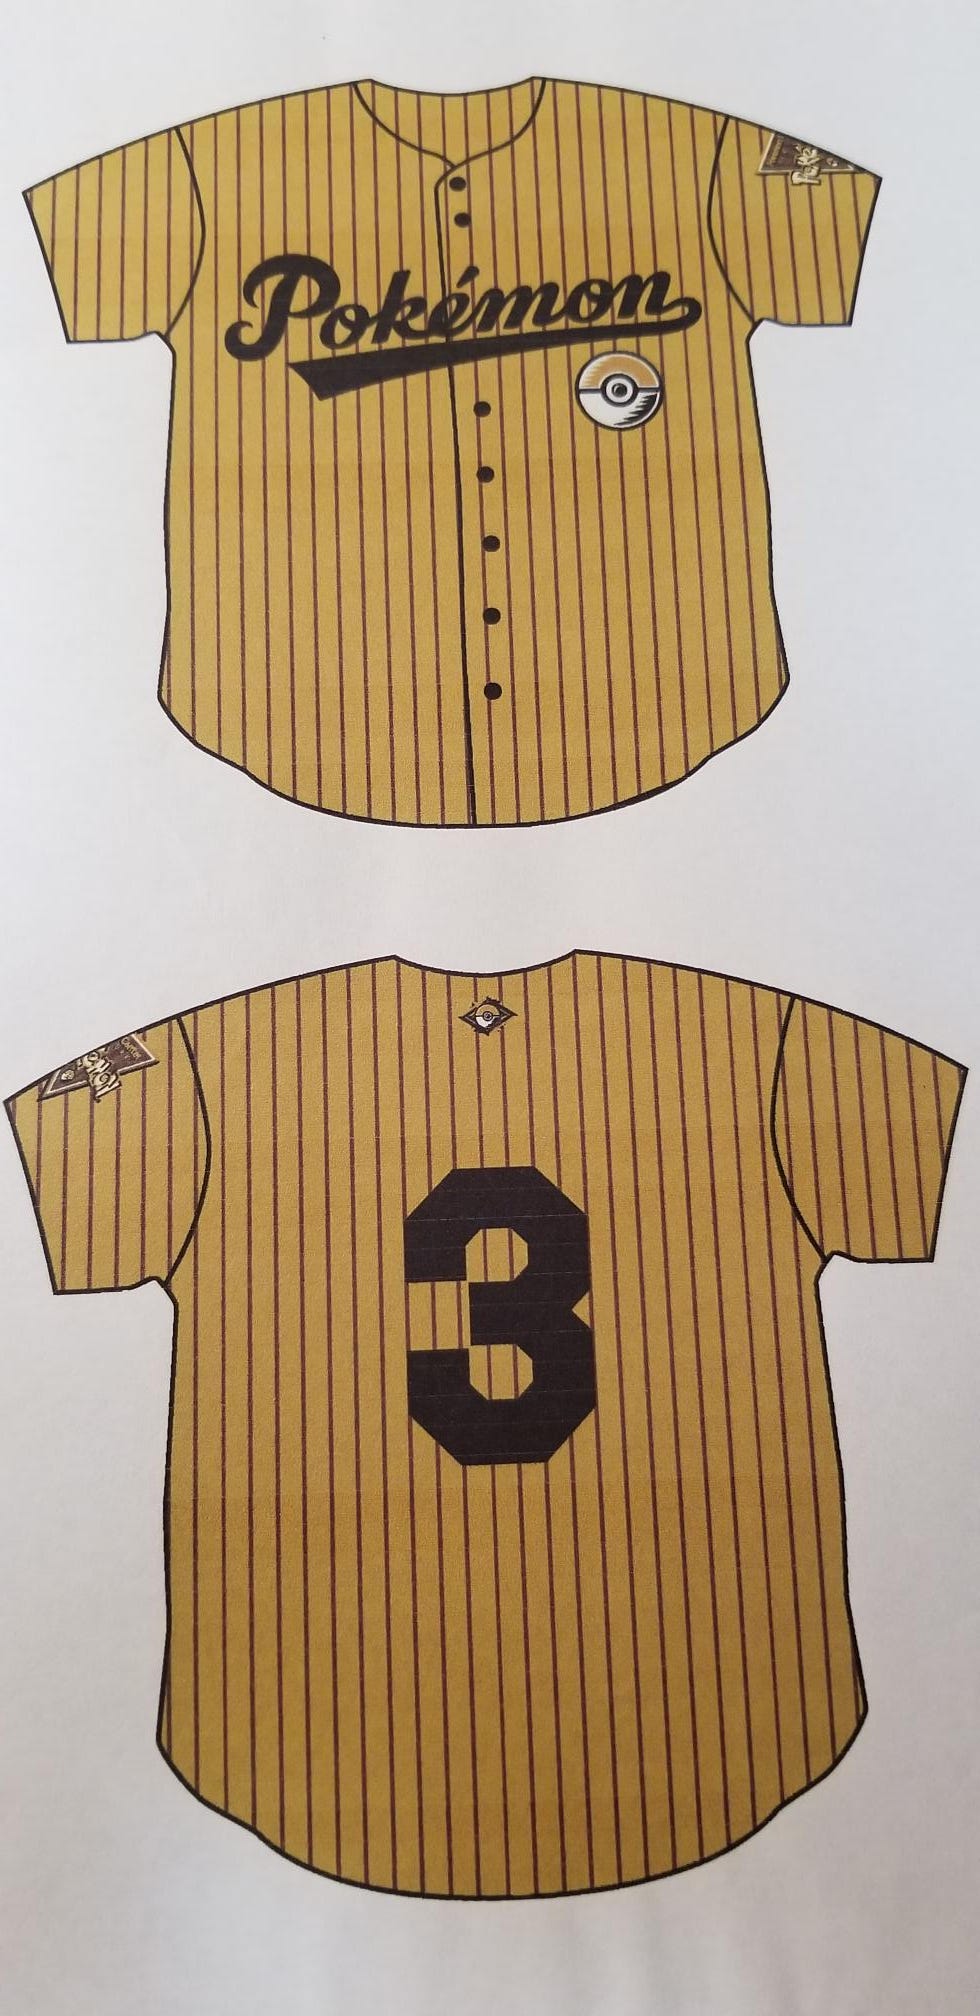 The Baseball uniform designs for employees of the Pokémon Center NYC store